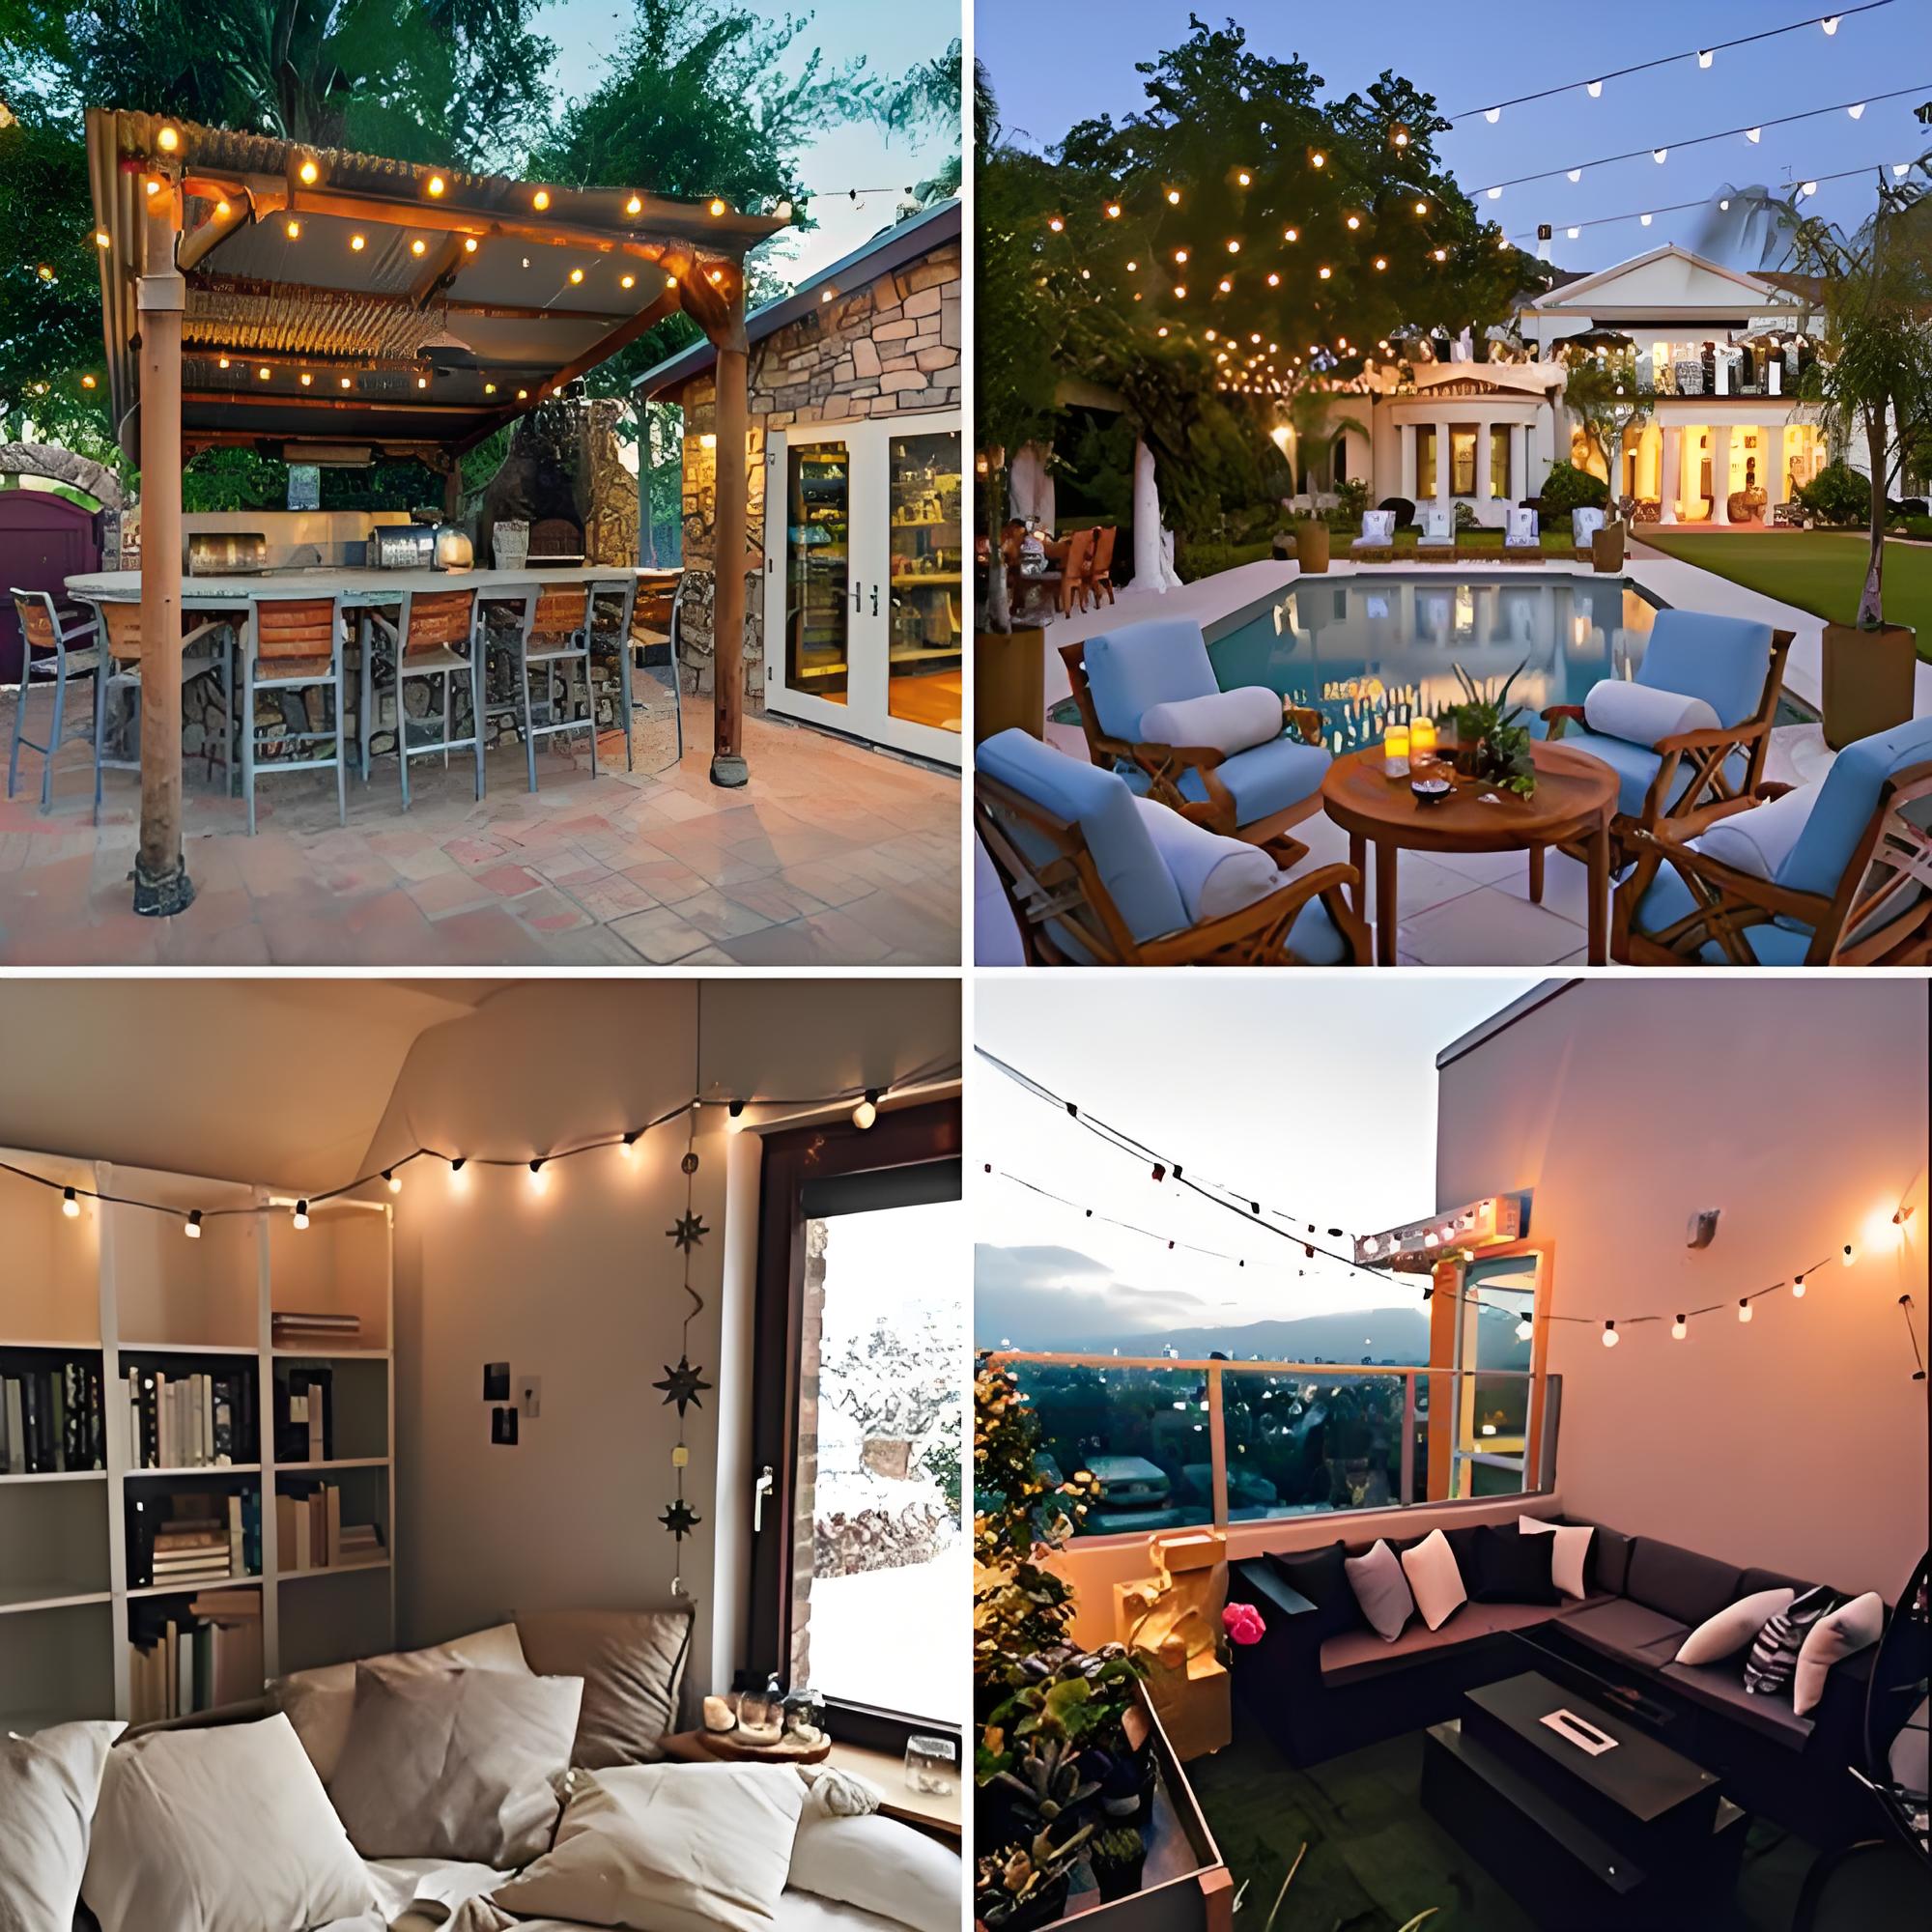 Outdoor String Lights, Connectable 32FT 30+3 Bulbs G40 Globe Led String Lights, IP65 Waterproof Outdoor Patio String Lights Plug in for Backyard Porch Garden Bistro Gazebo Cafe Deck Wedding Party